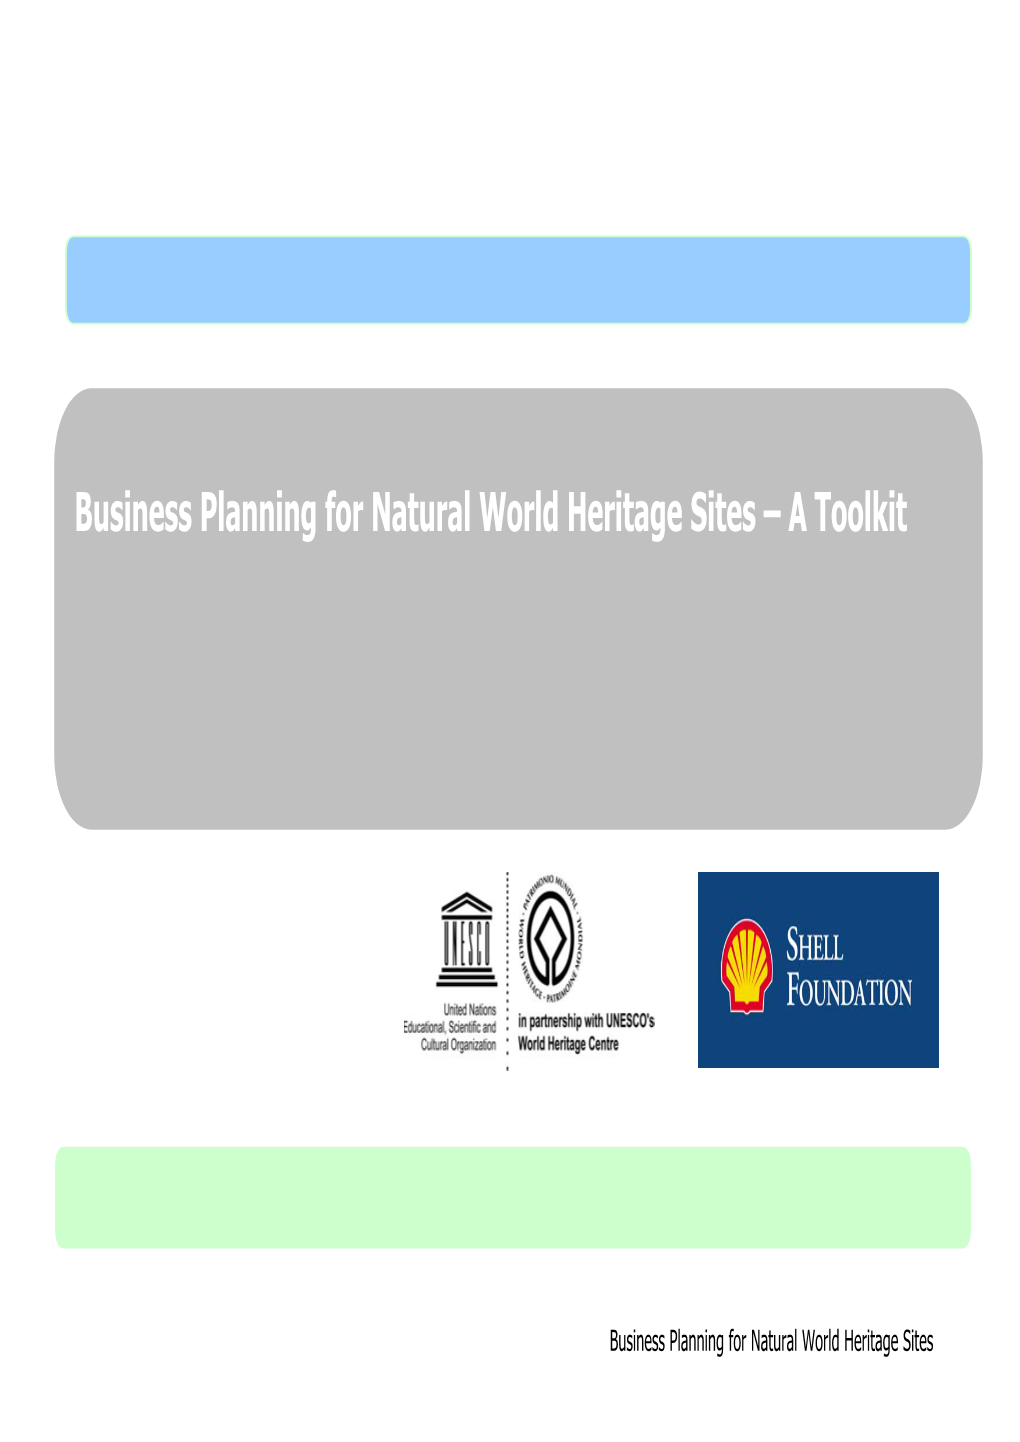 Business Planning for Natural World Heritage Sites – a Toolkit